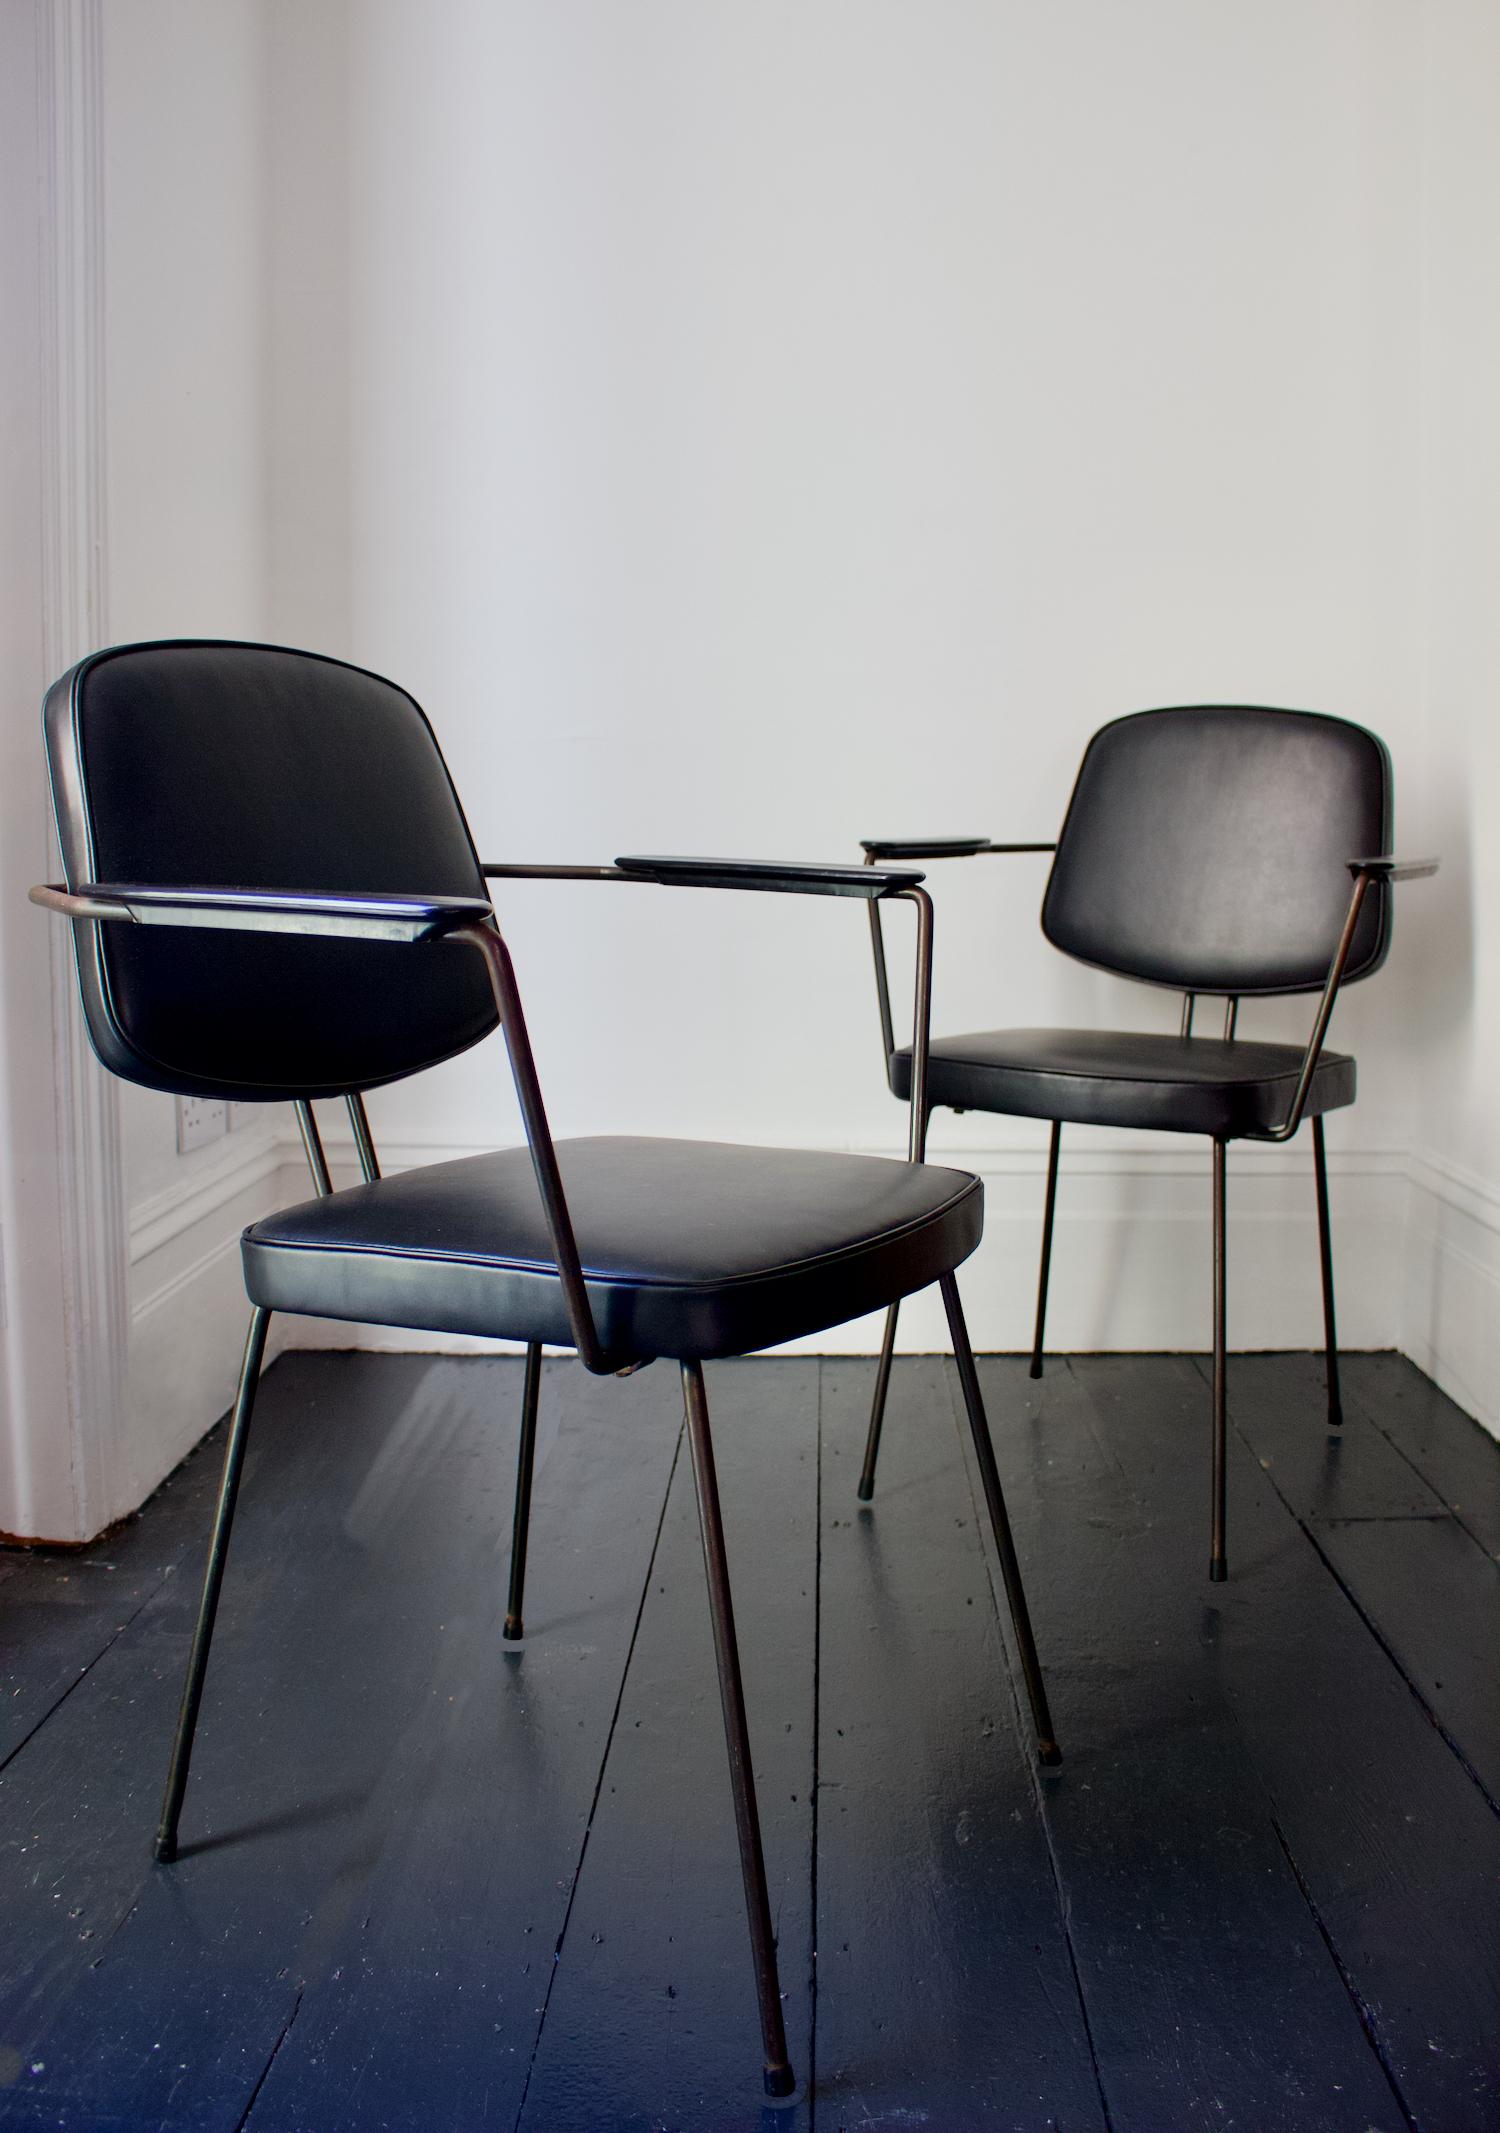 Pair of chairs designed by Rudolf Wolf for Elsrijk, re-upholstered in black leather. Netherlands, mid-20th century.

The chairs have a simple minimal design with the bent metal rod being the same for the legs and upper frame, which continues from